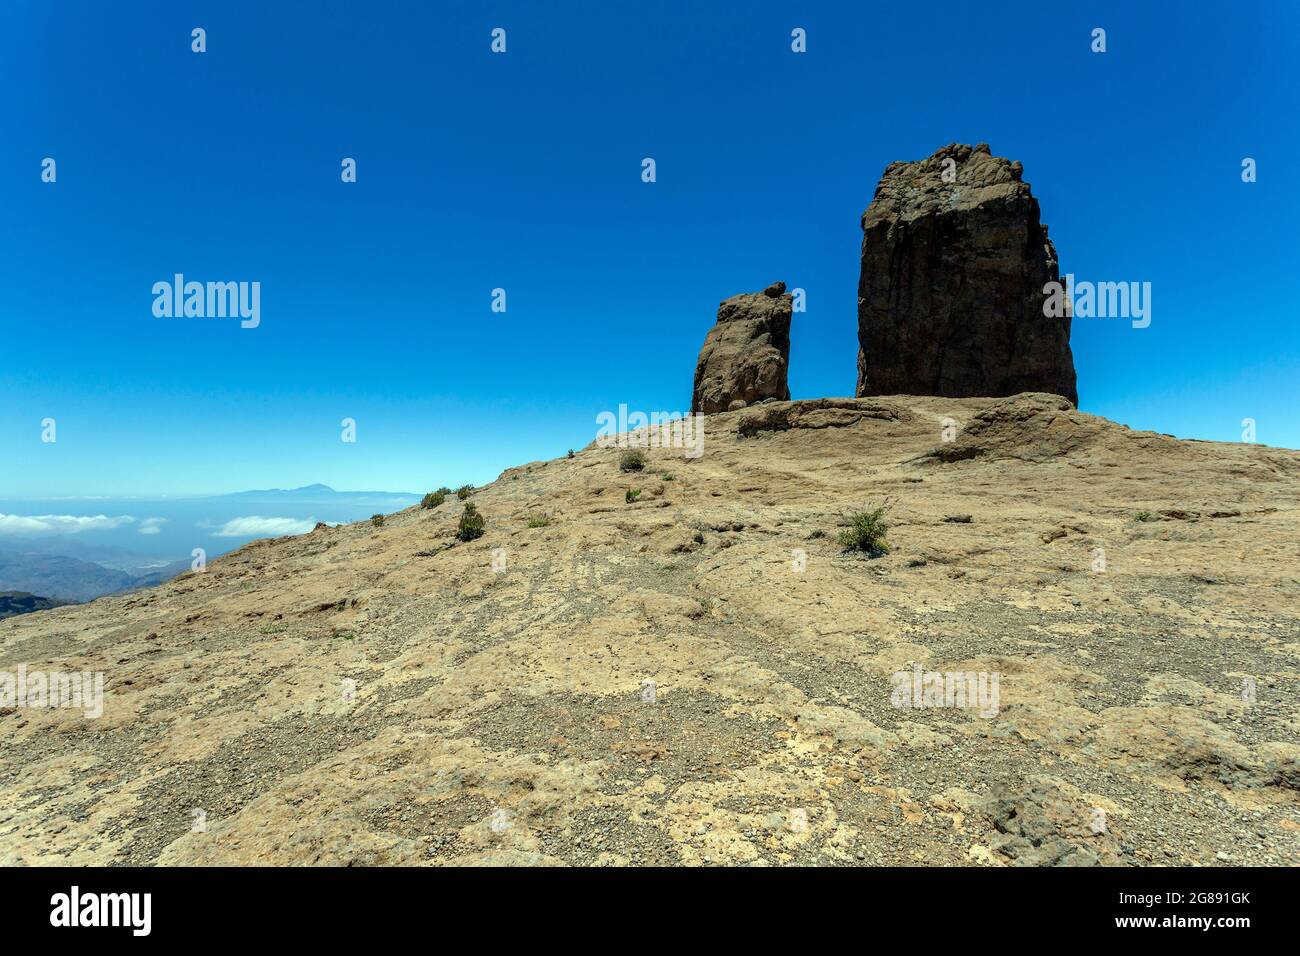 The Roque Nublo (Rock in the Clouds) in Gran Canaria, Spain Stock Photo -  Alamy